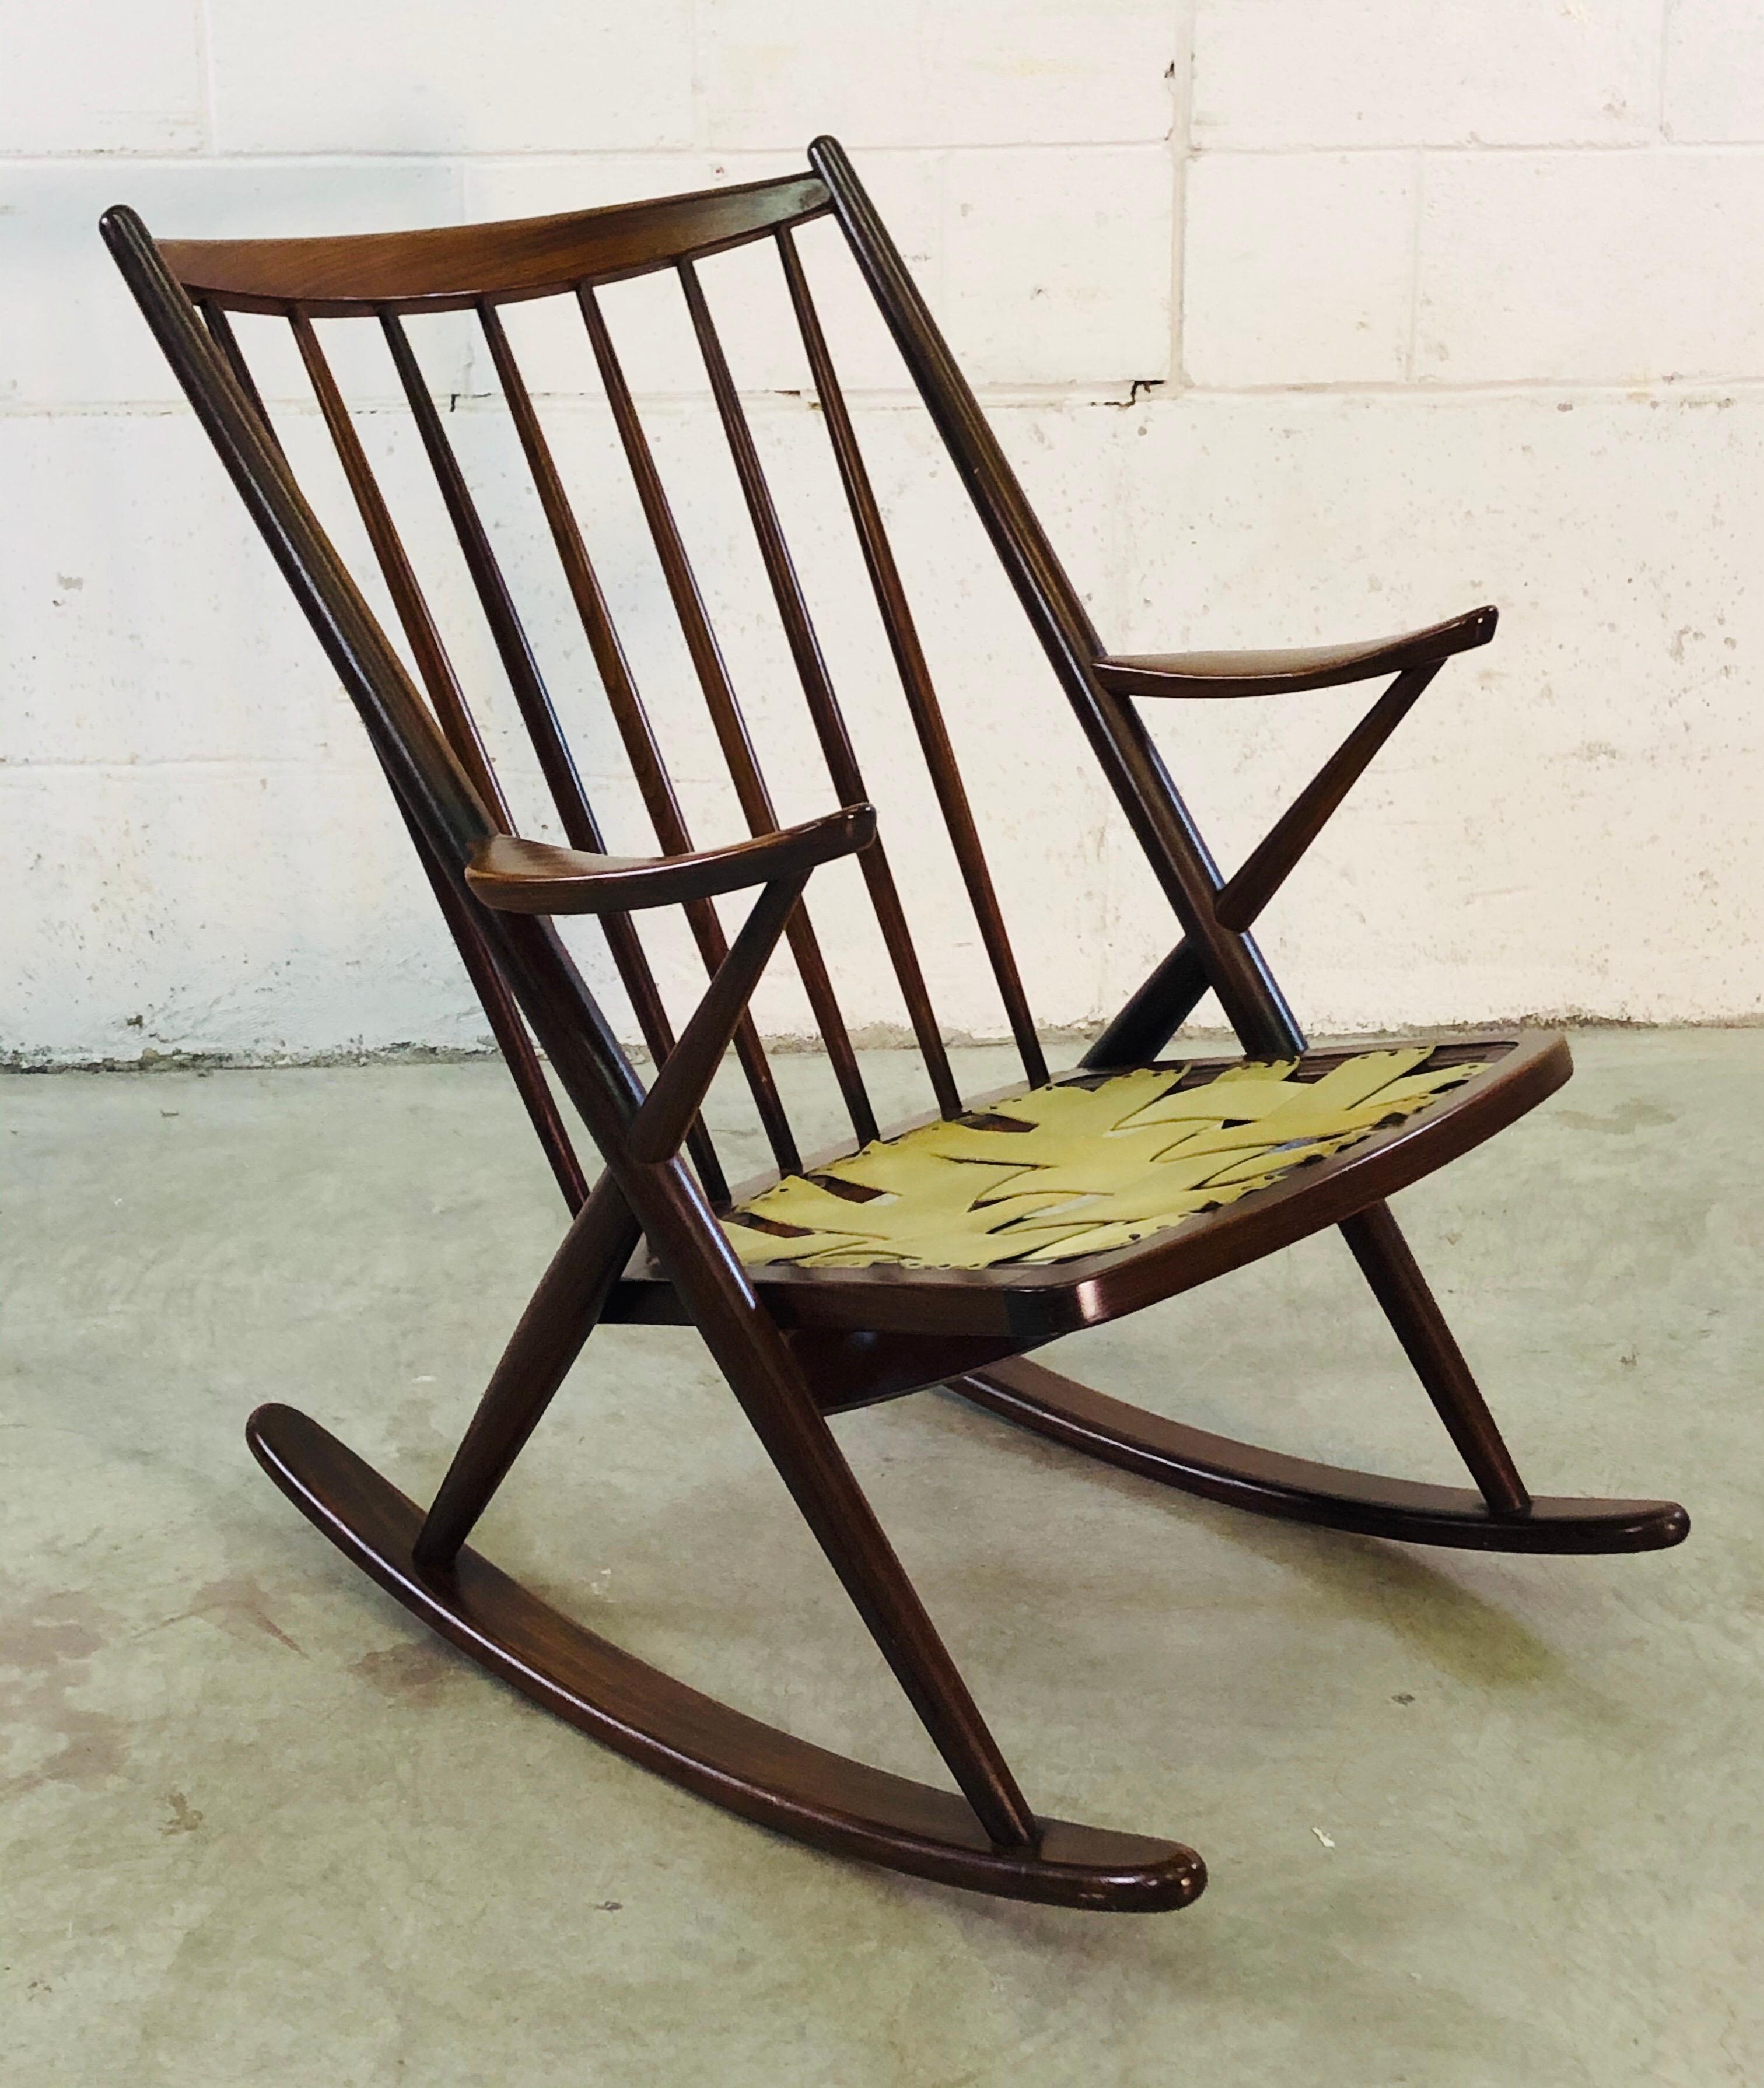 Vintage Danish modern rosewood rocking chair designed by Frank Reenskaug for Brahmin Mobler, 1960s. Well designed and extremely comfortable rocking chair is sturdy and in excellent condition. Cushions need replacement. No marks.